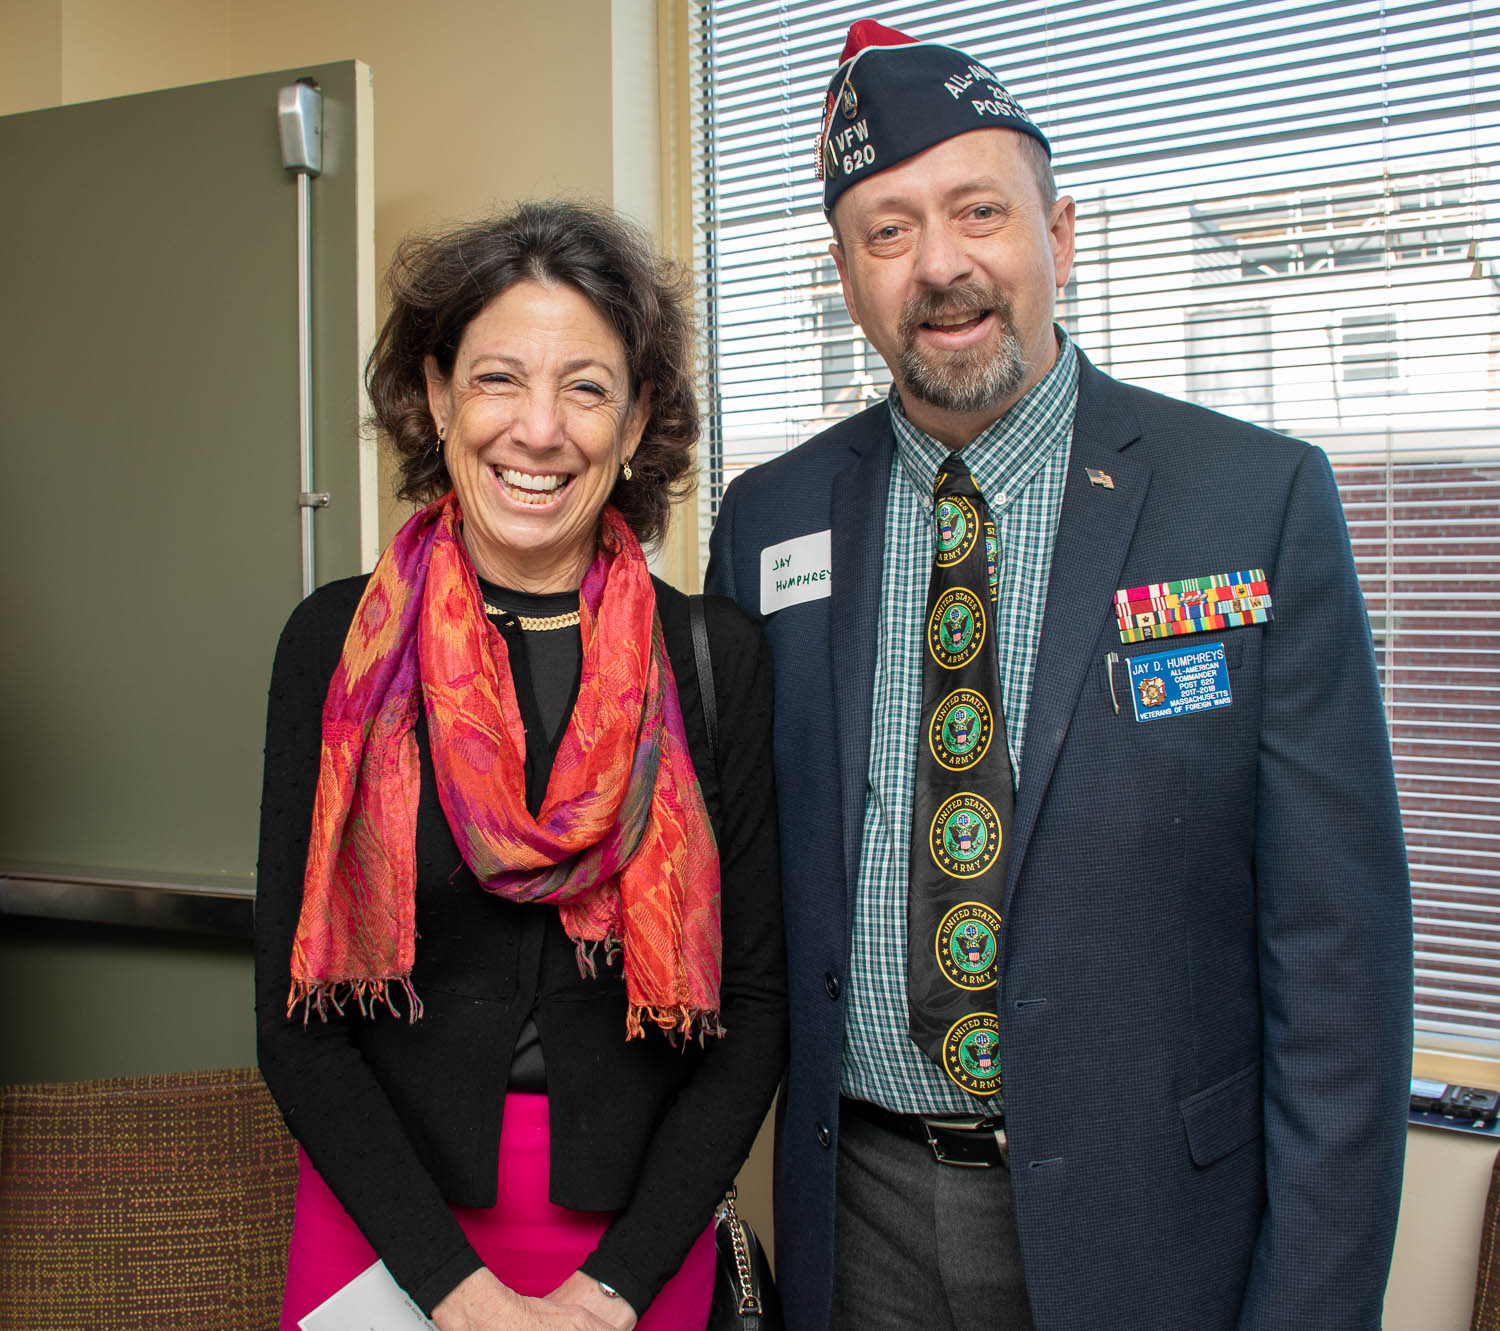 President Janet L. Steinmayer and Jay Humphreys of VFW Post 620